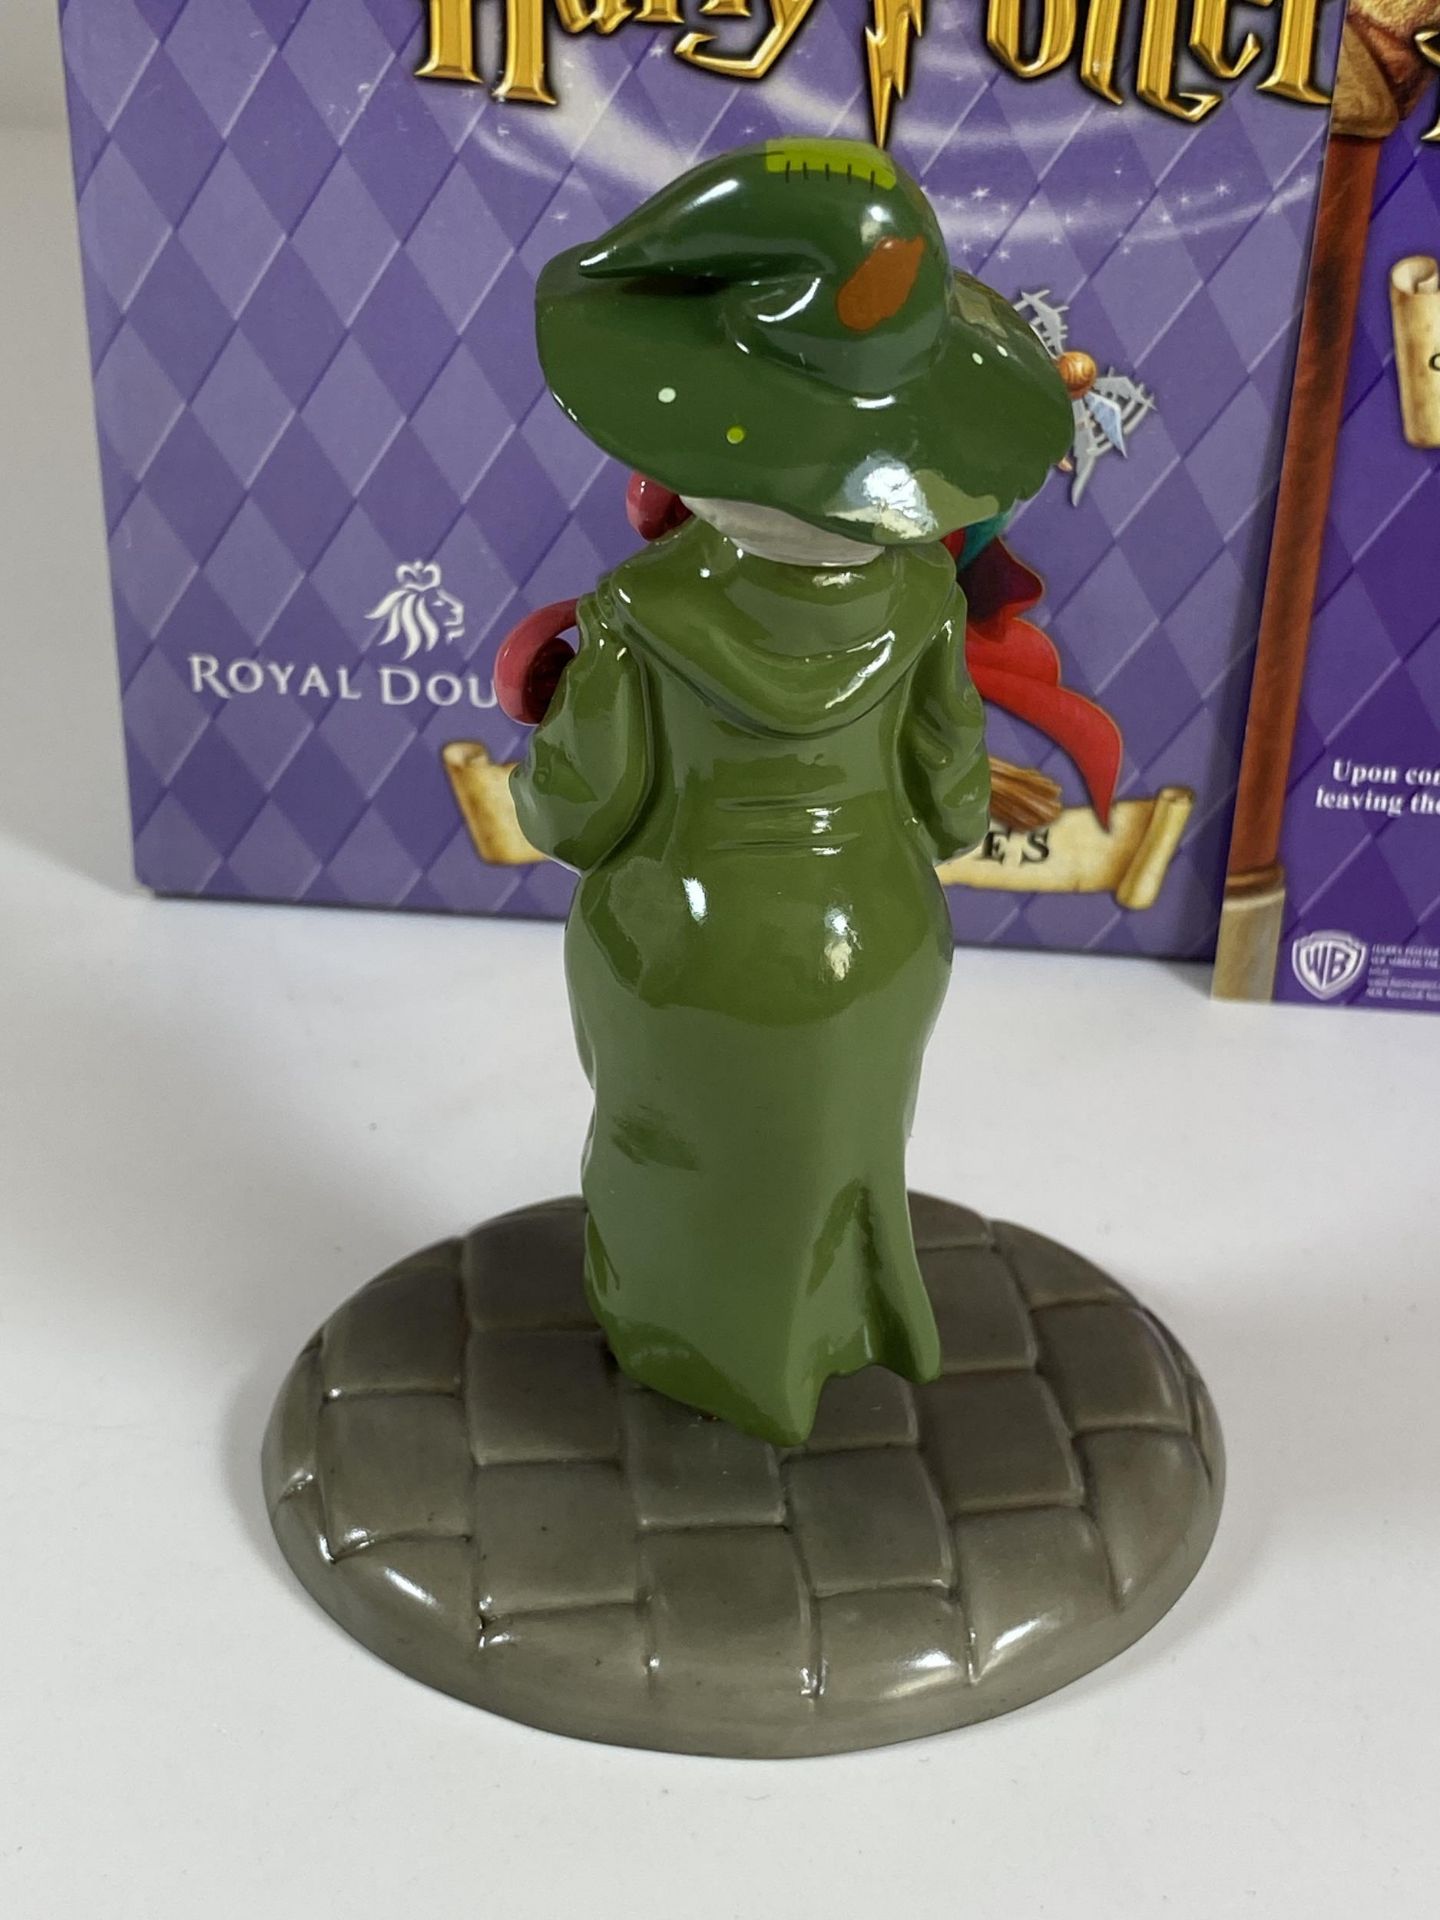 A BOXED ROYAL DOULTON HARRY POTTER PROFESSOR SPROUT HPFIG21 FIGURE WITH CERTIFICATE - Image 3 of 6